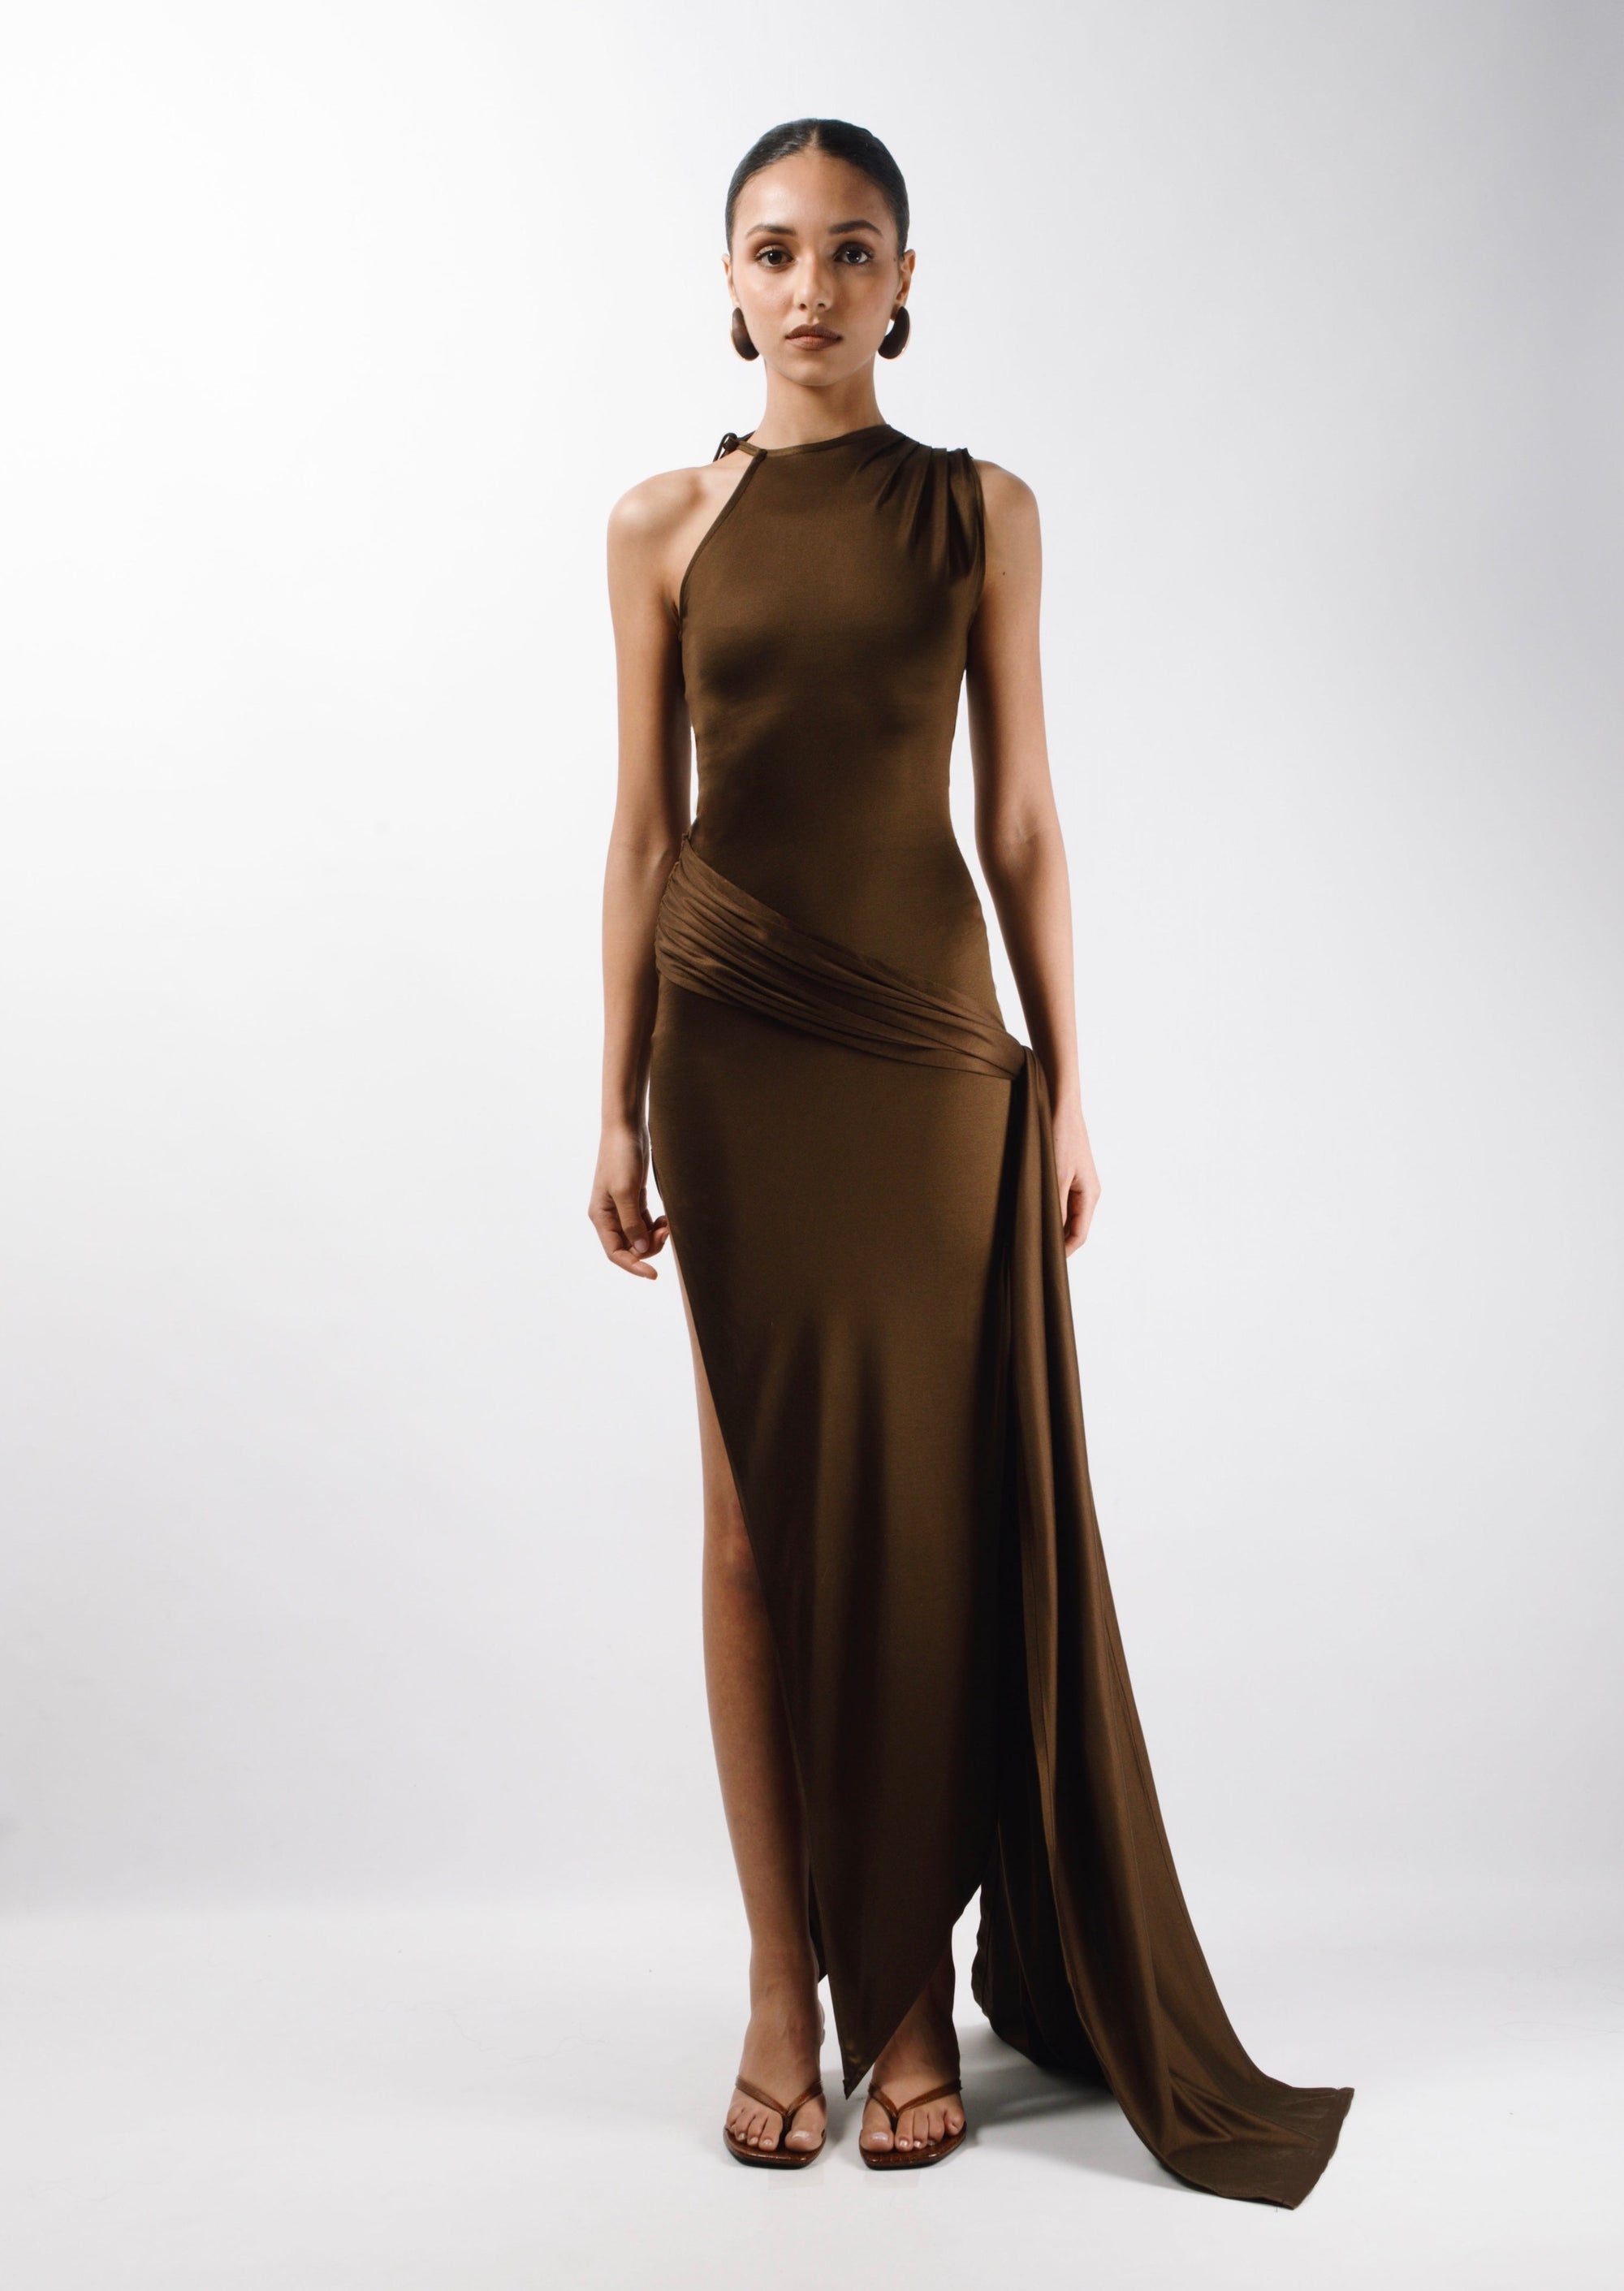 Long Asymmetric Dress in brown Gold Silk fabric with a pleated sleeve and an adjustable sleeve, the Dress features a long train attached from the waist and an opening slit that hits at the ankle - front